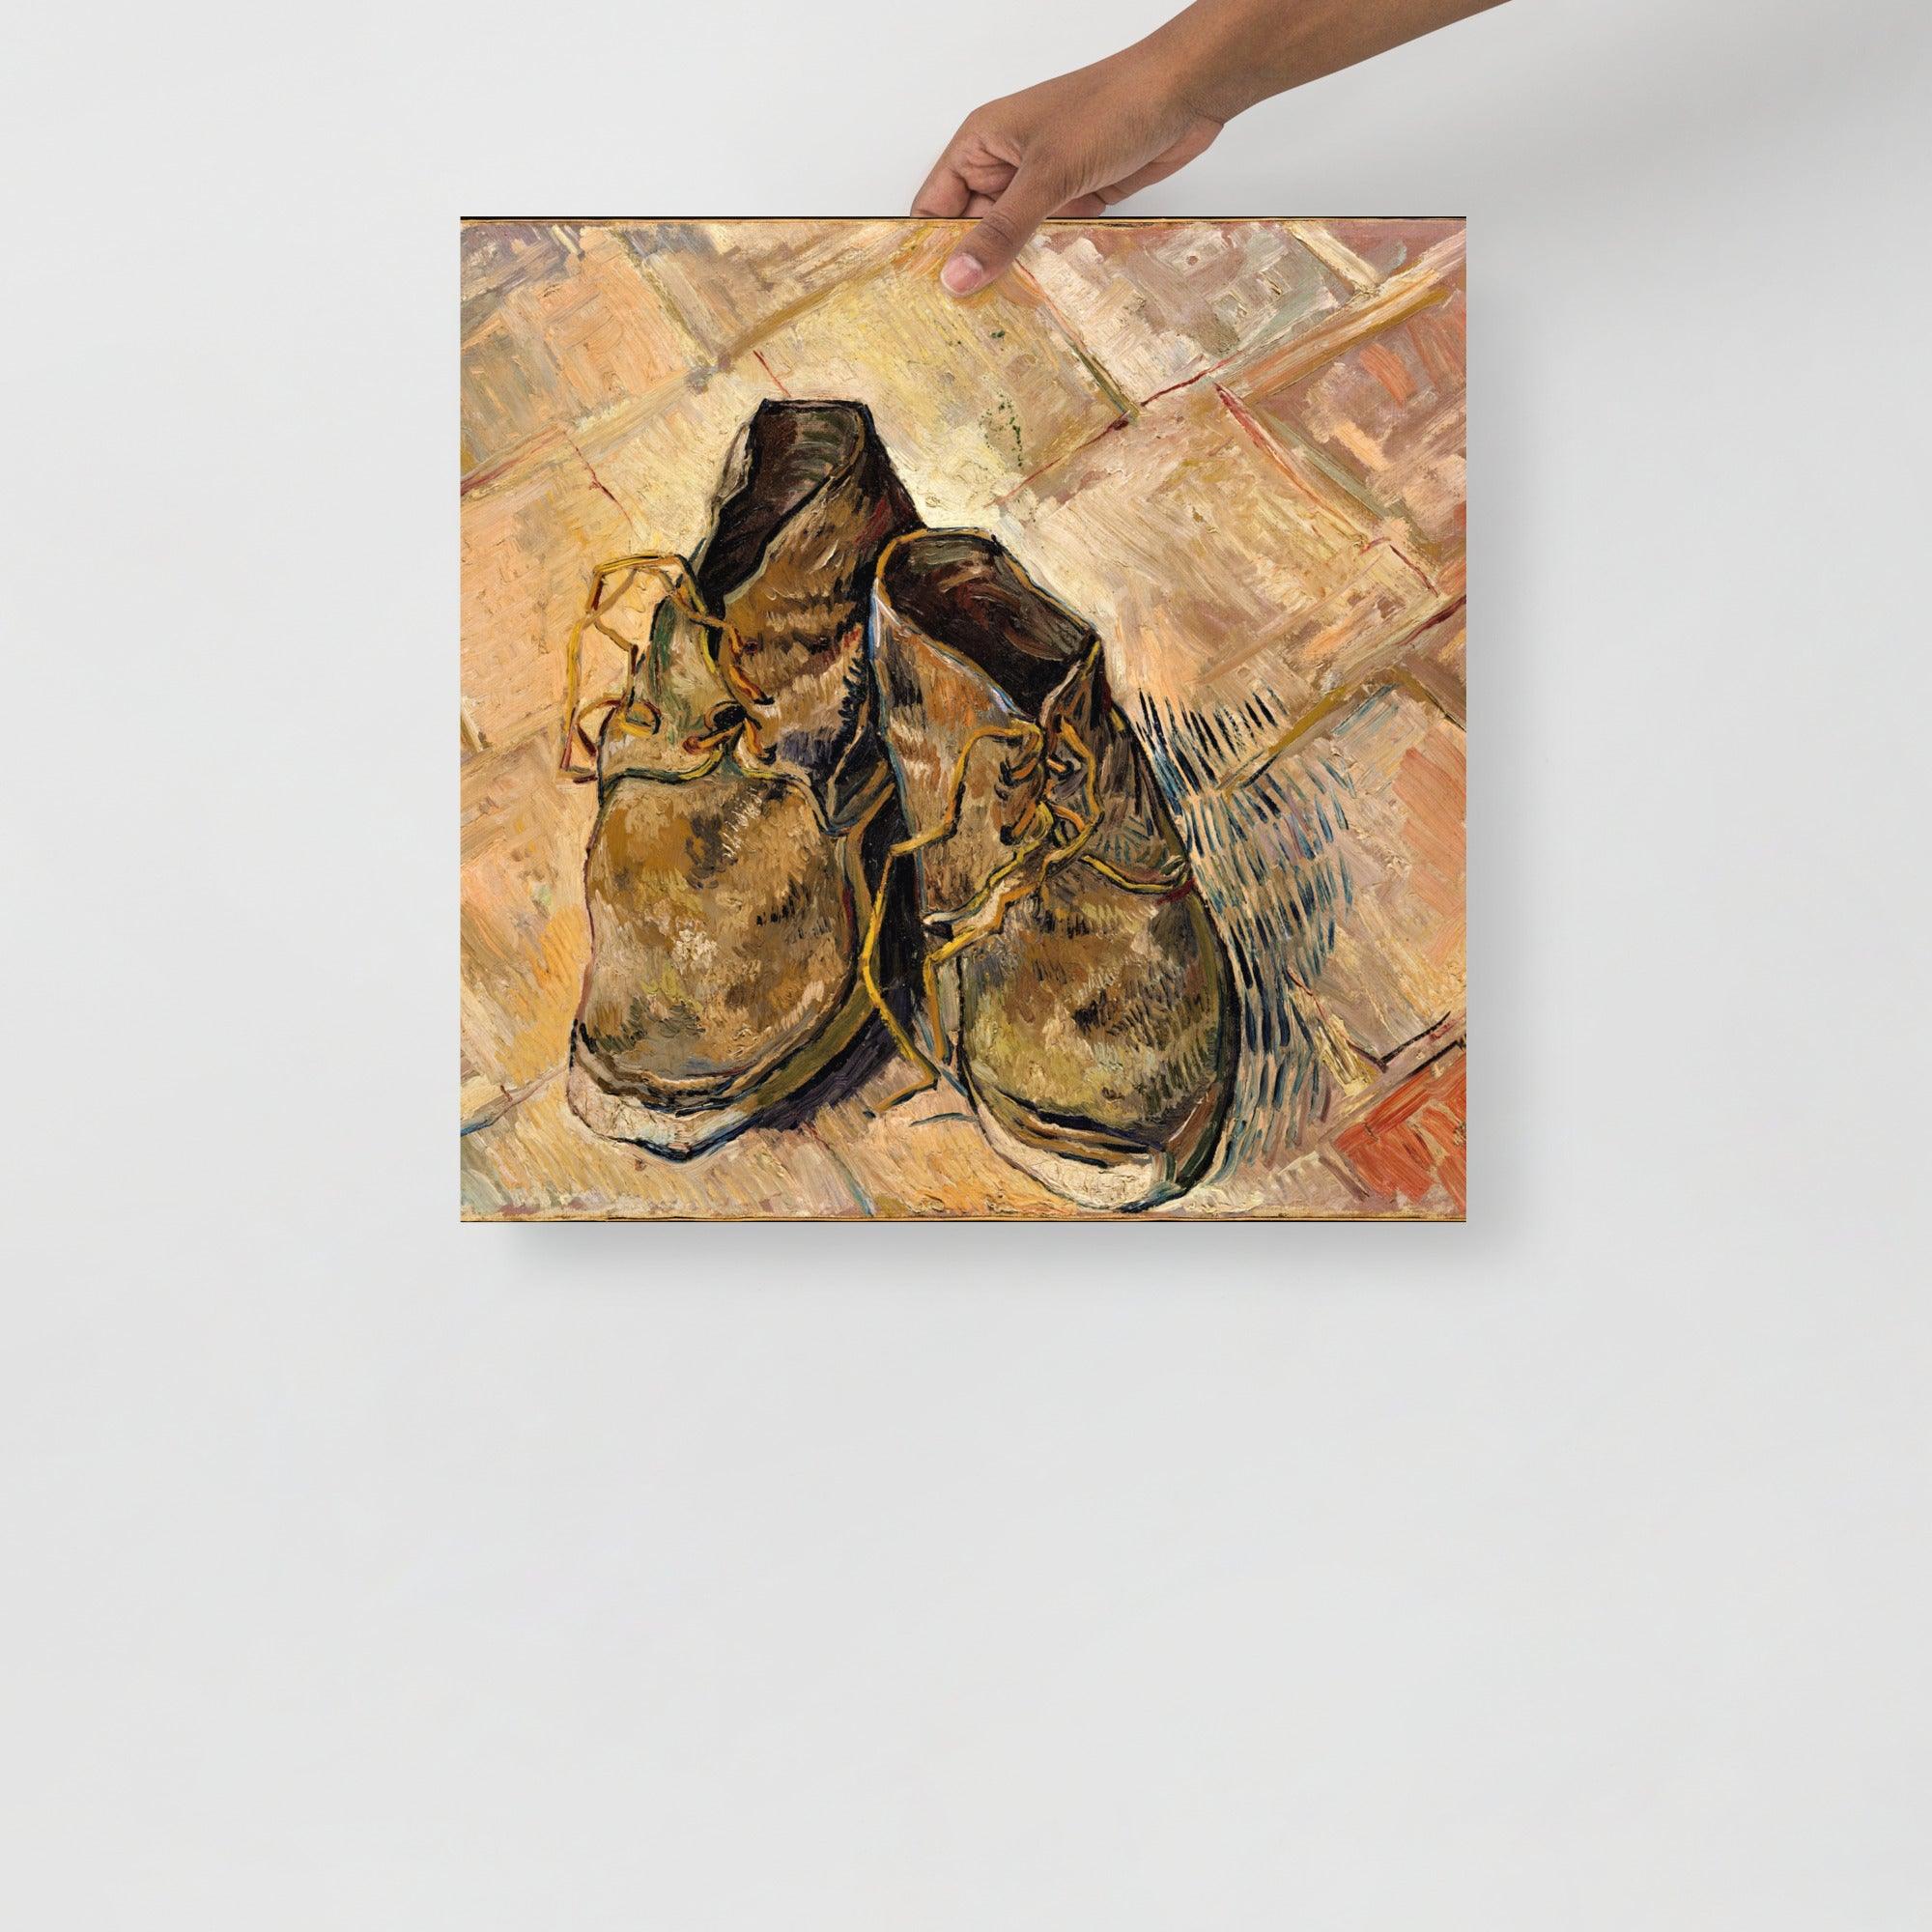 A Shoes by Vincent Van Gogh poster on a plain backdrop in size 18x18”.